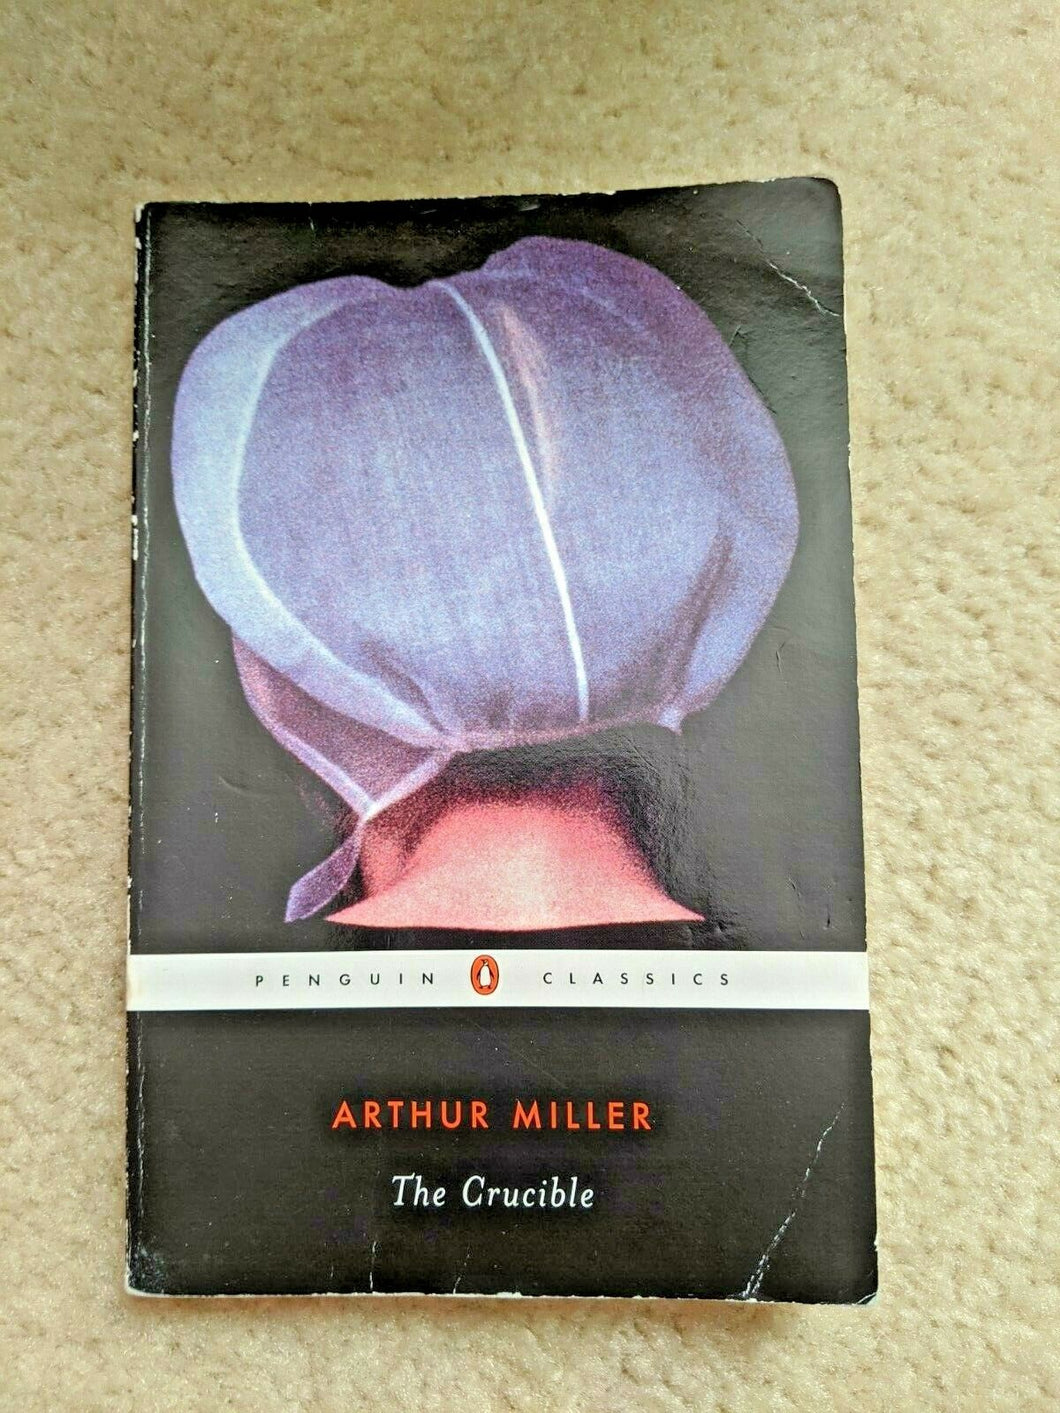 The Crucible: A Play in Four Acts by Arthur Miller (Penguin Classics) - Perfume Gallery